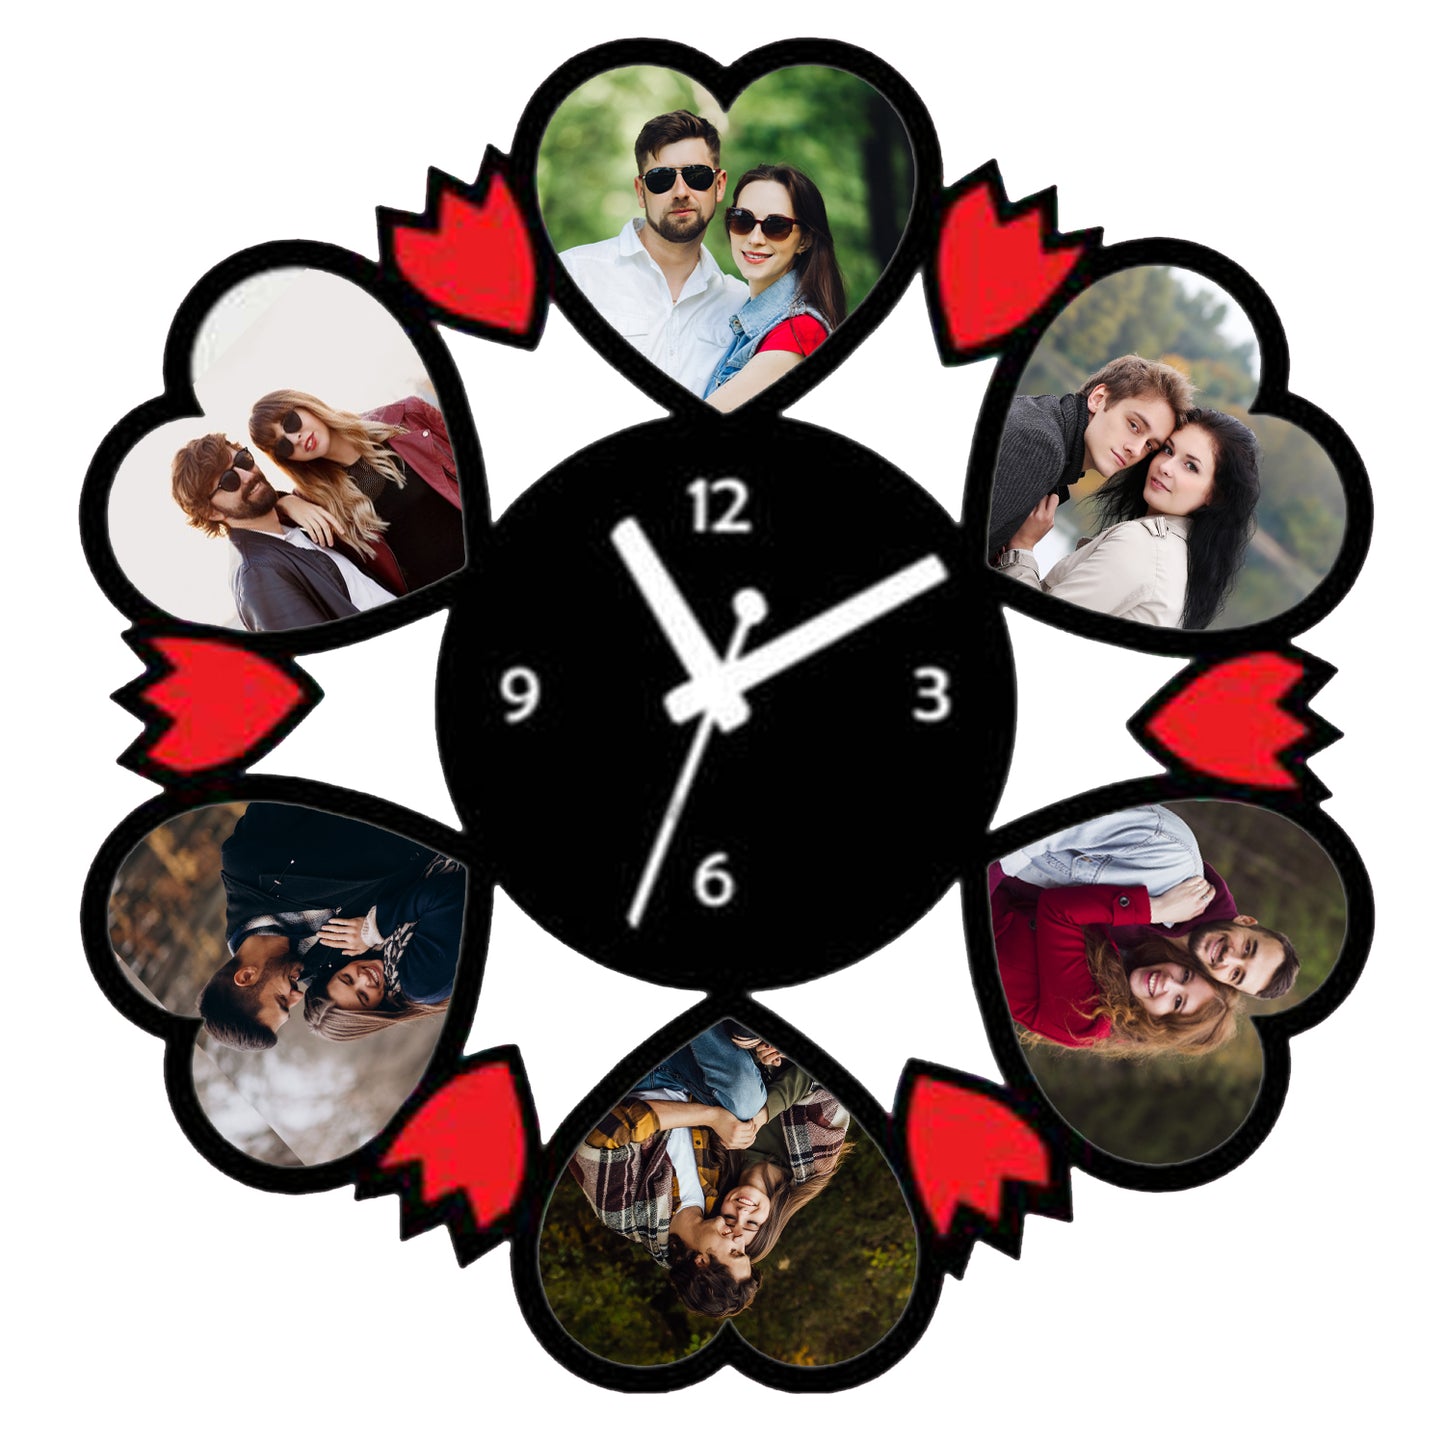 Customized Wall Clock | 16x16 inches